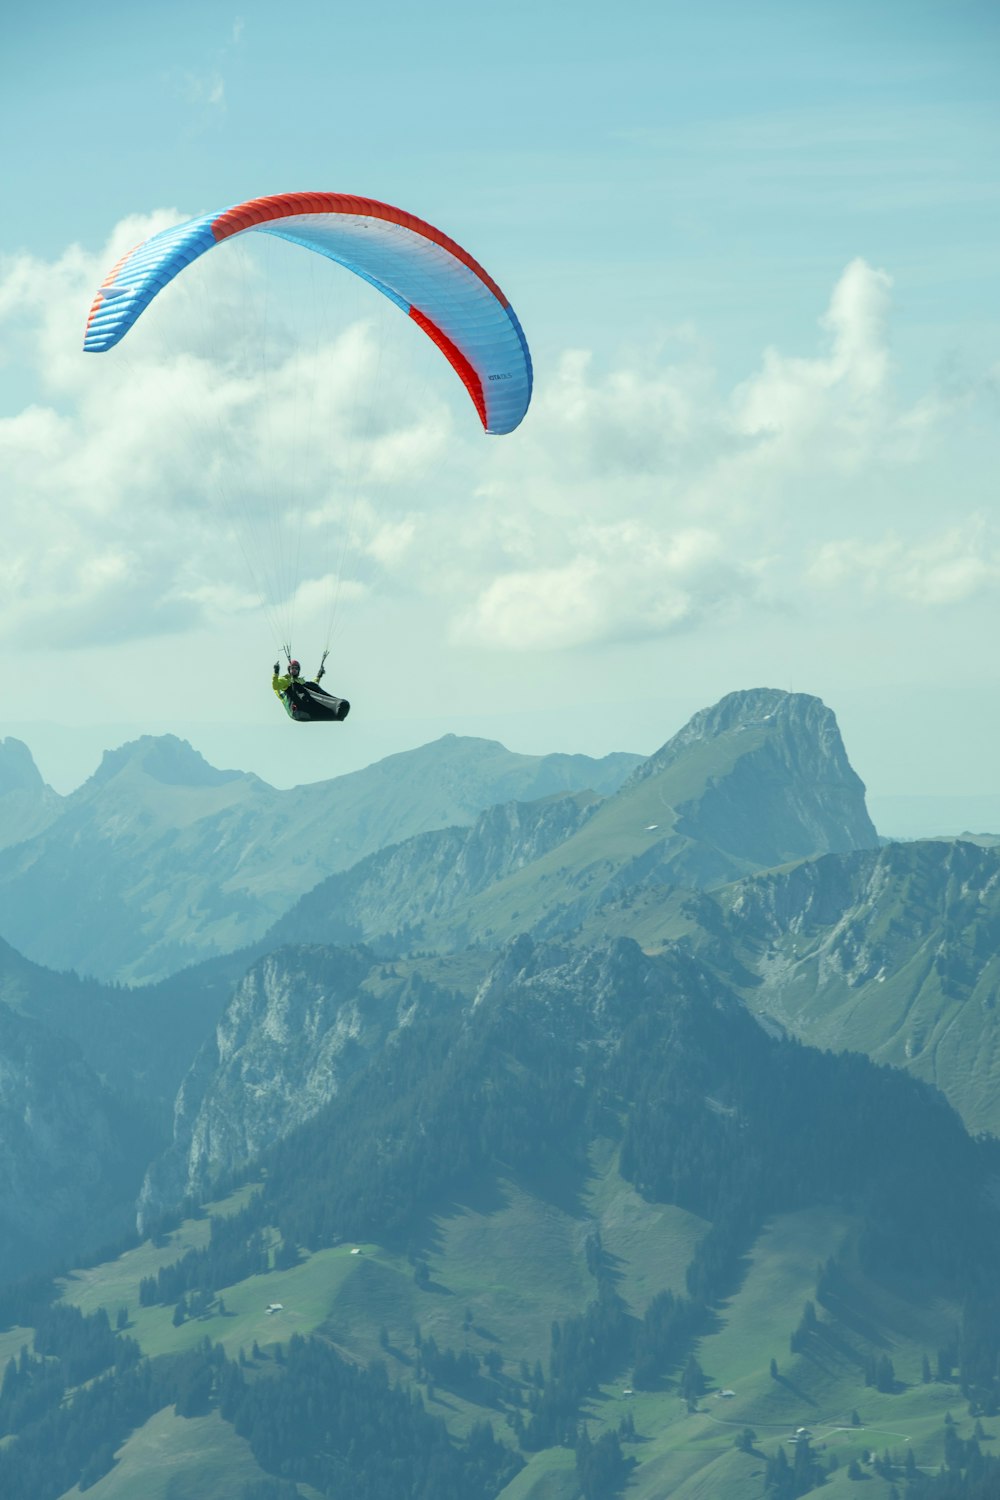 a paraglider in the air over a mountain range